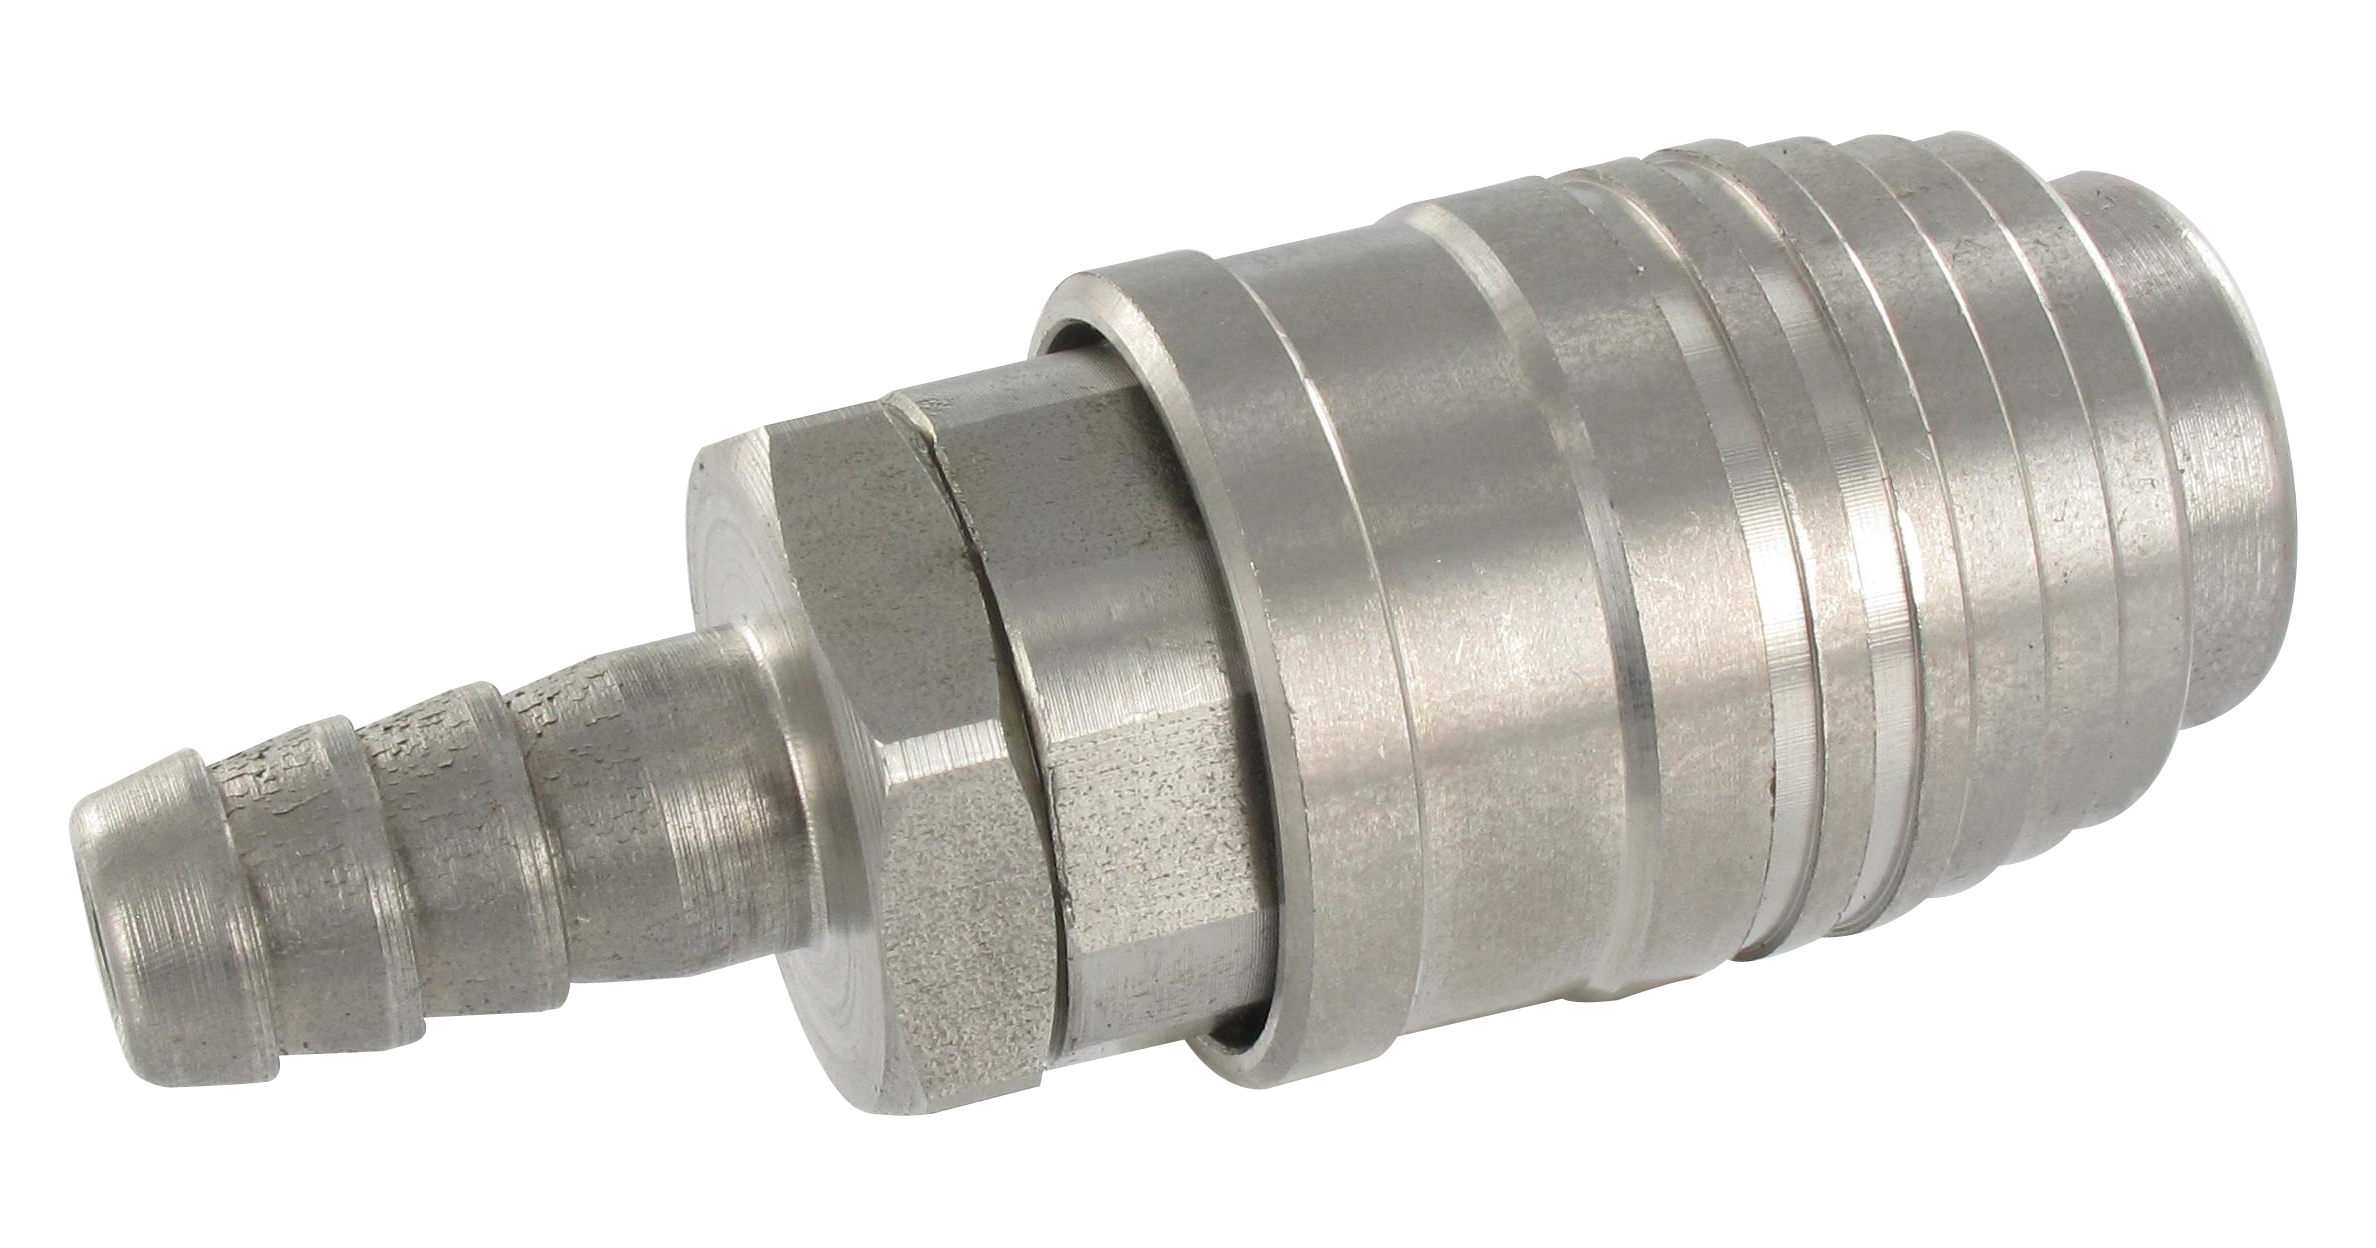 ISO-B barb connector couplings with 5.5 mm bore in stainless steel 303 Fittings and couplings